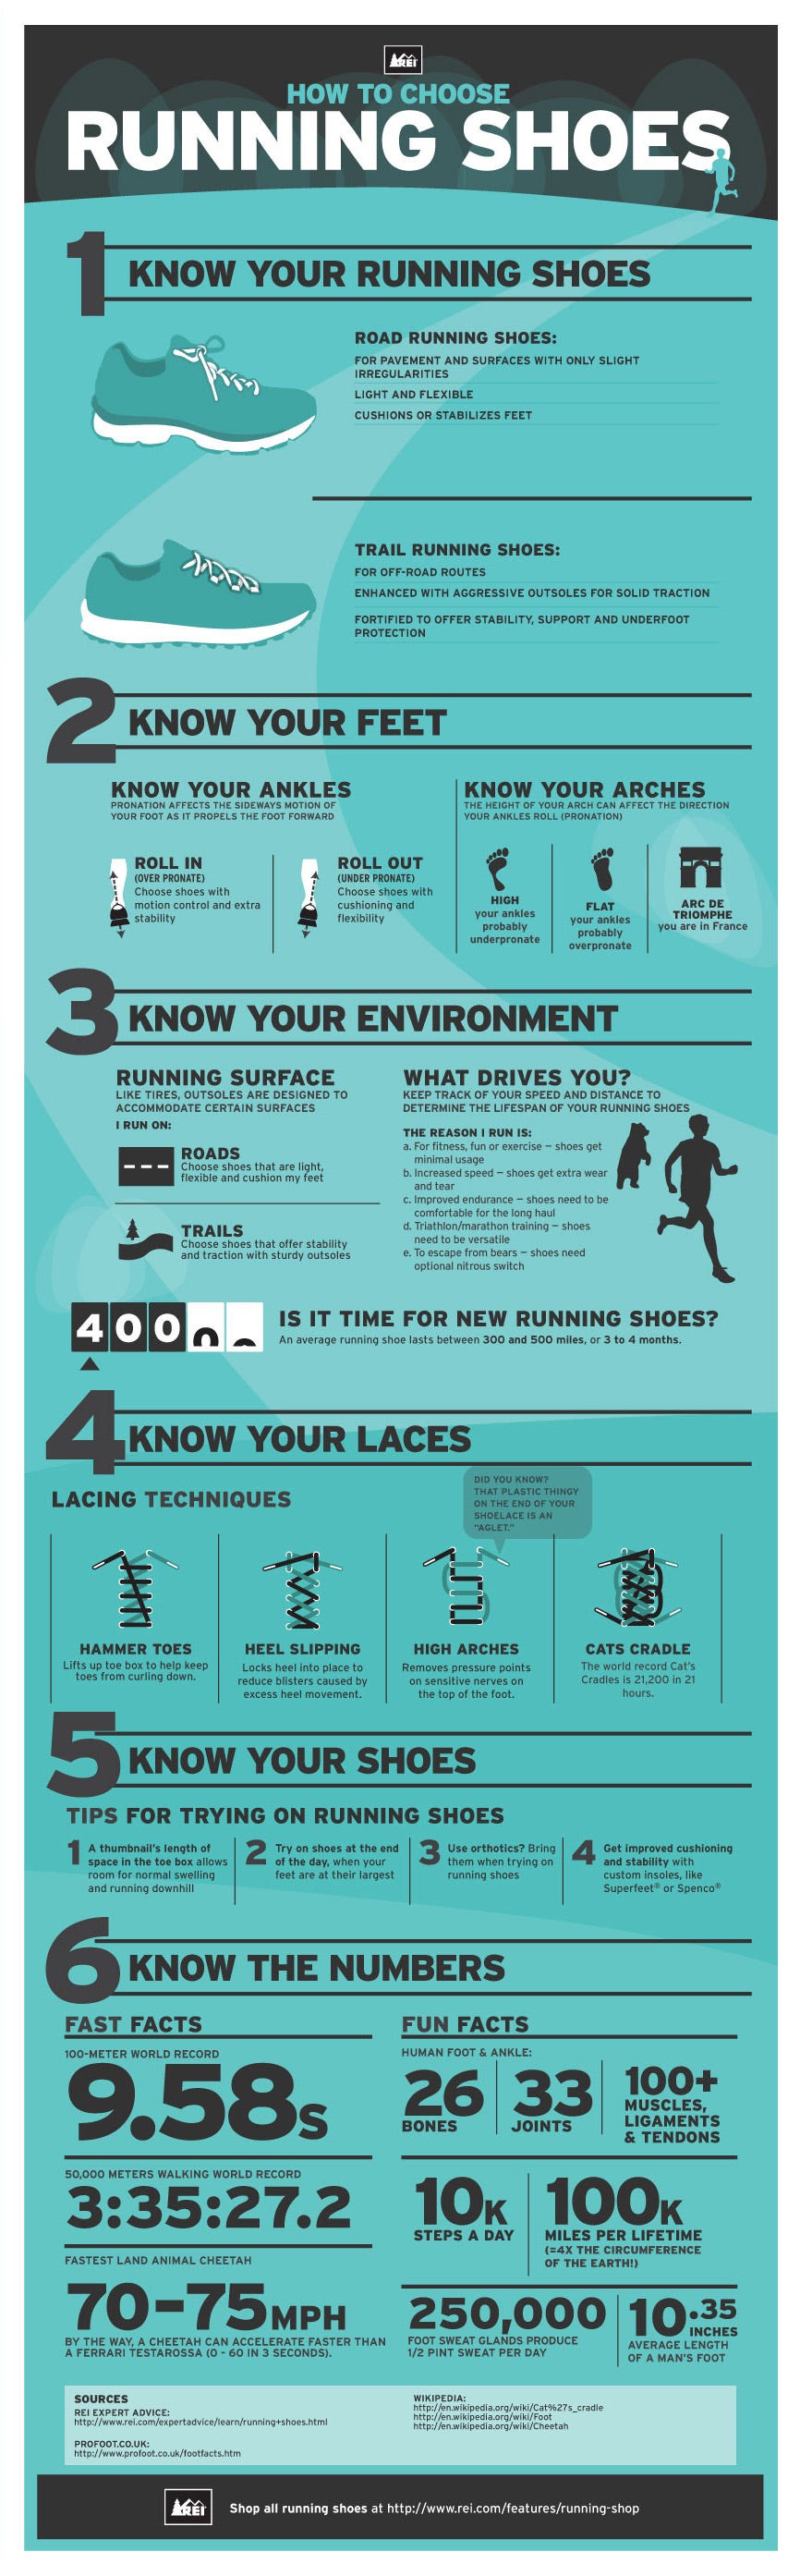 Running Shoes Infographic: How to Choose the Best Running Shoes